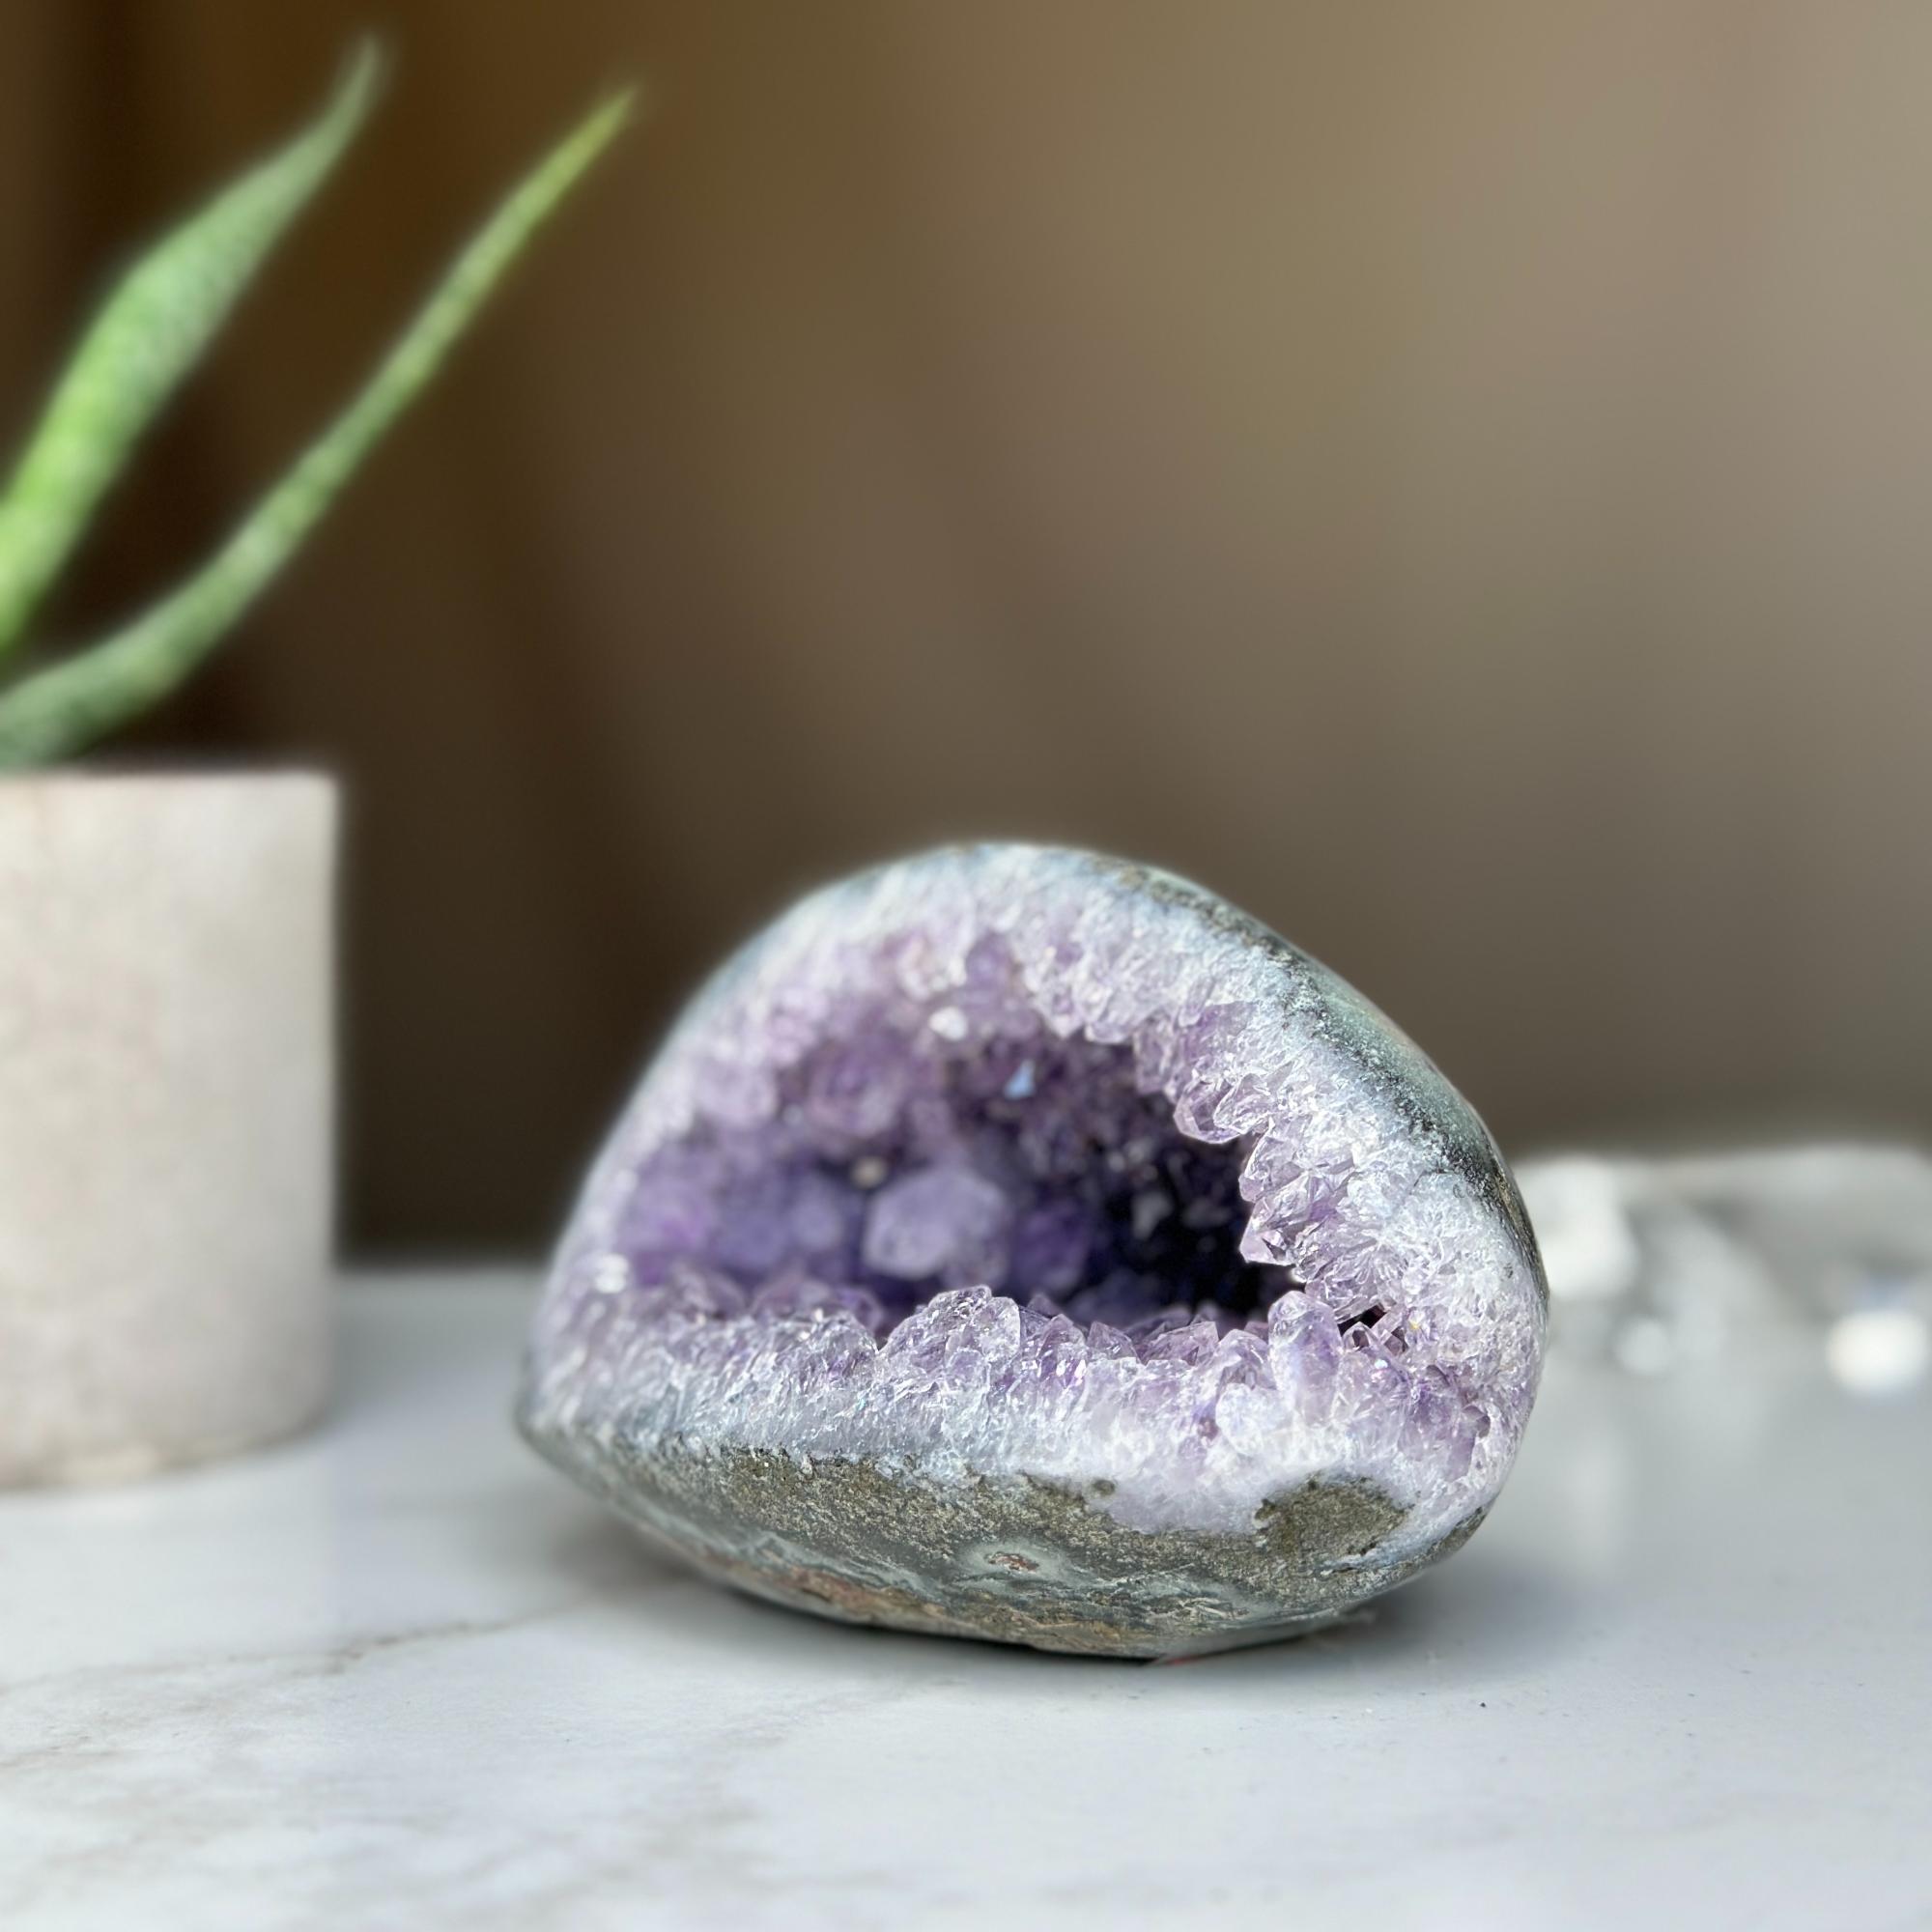 Amethyst Geode Bowl, Natural Deep Purple Amethyst Crystal Round Shaped Cluster, Home Decor Crystal Geode Cave